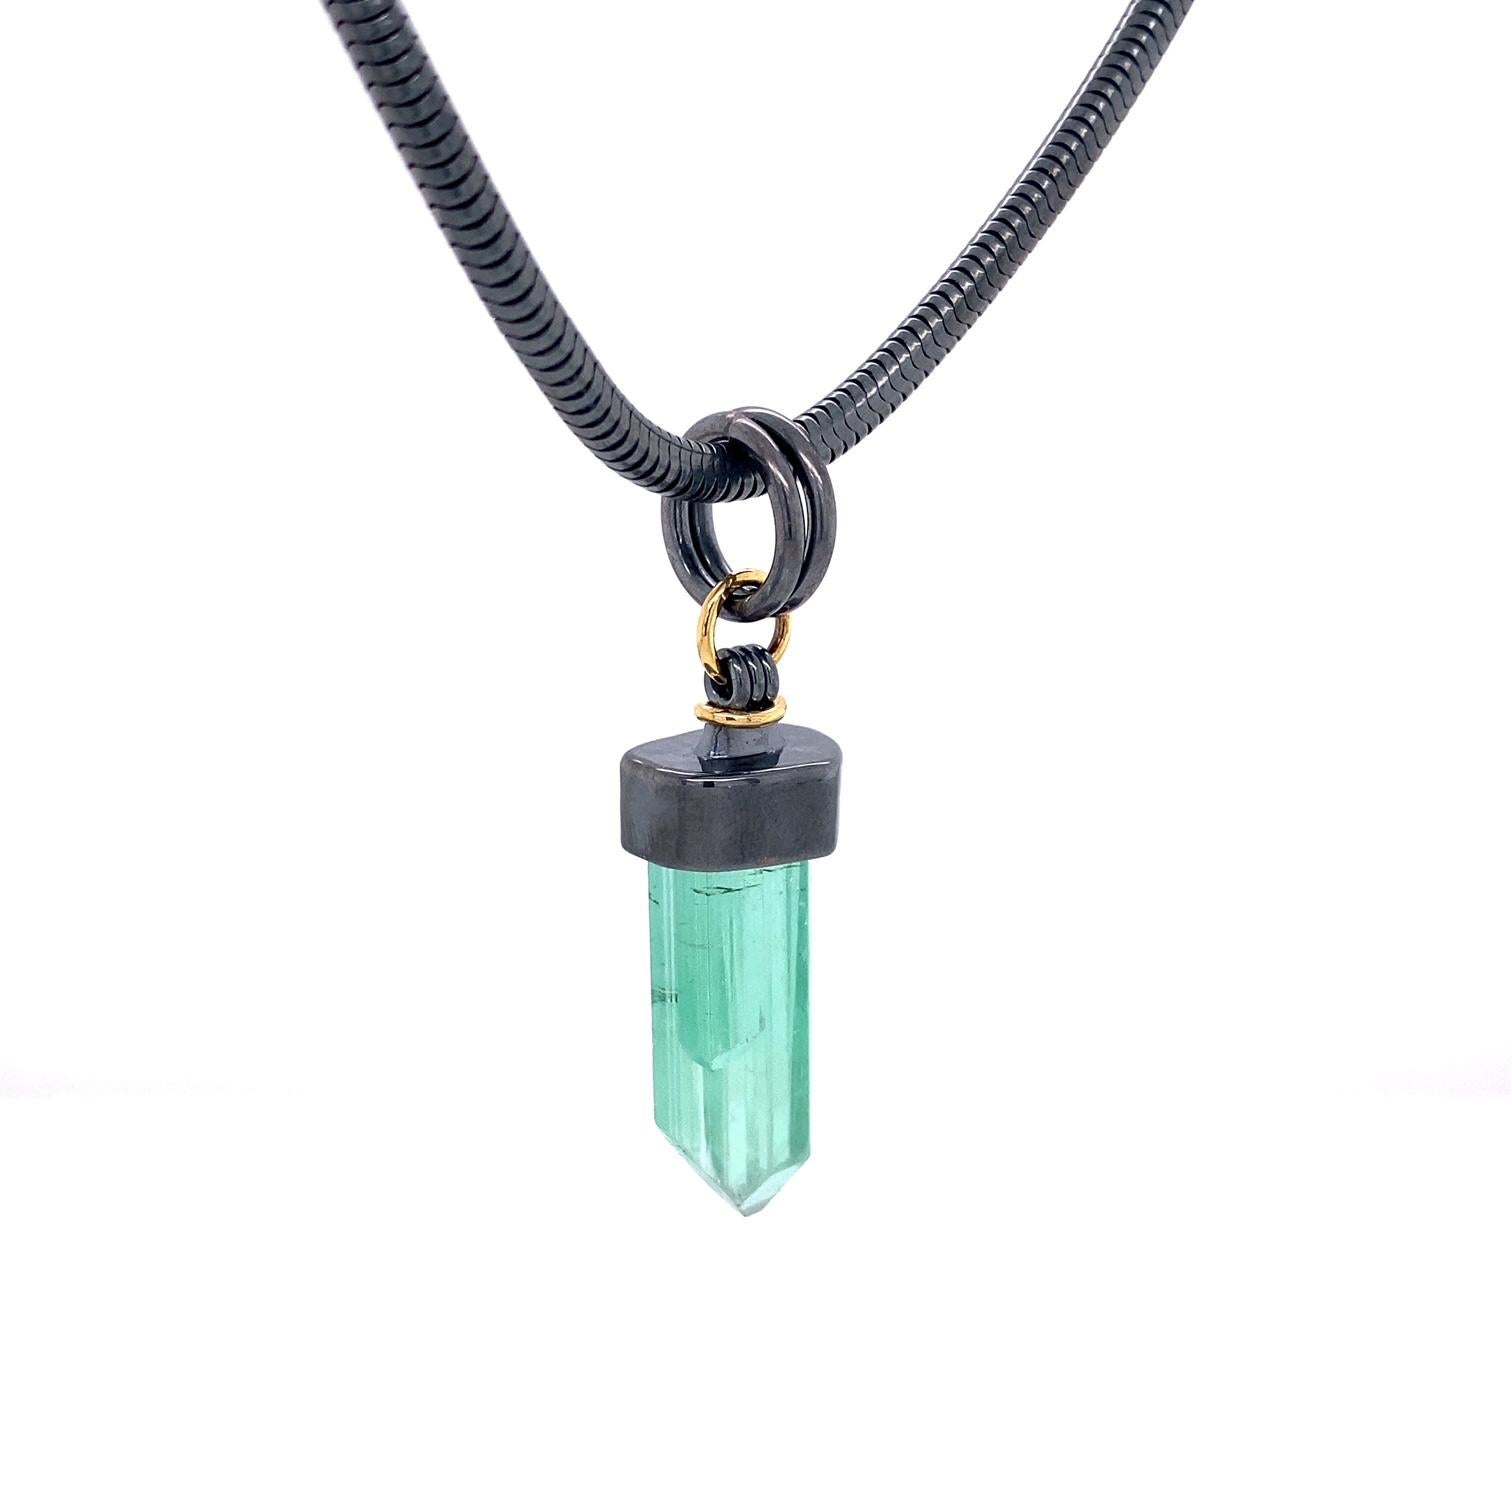 An oxidized sterling silver and 18k yellow gold pendant set with one 19.32 carat green tourmaline crystal on a 3mm 18 inch oxidized sterling silver snake chain. This necklace was made and designed by llyn strong.